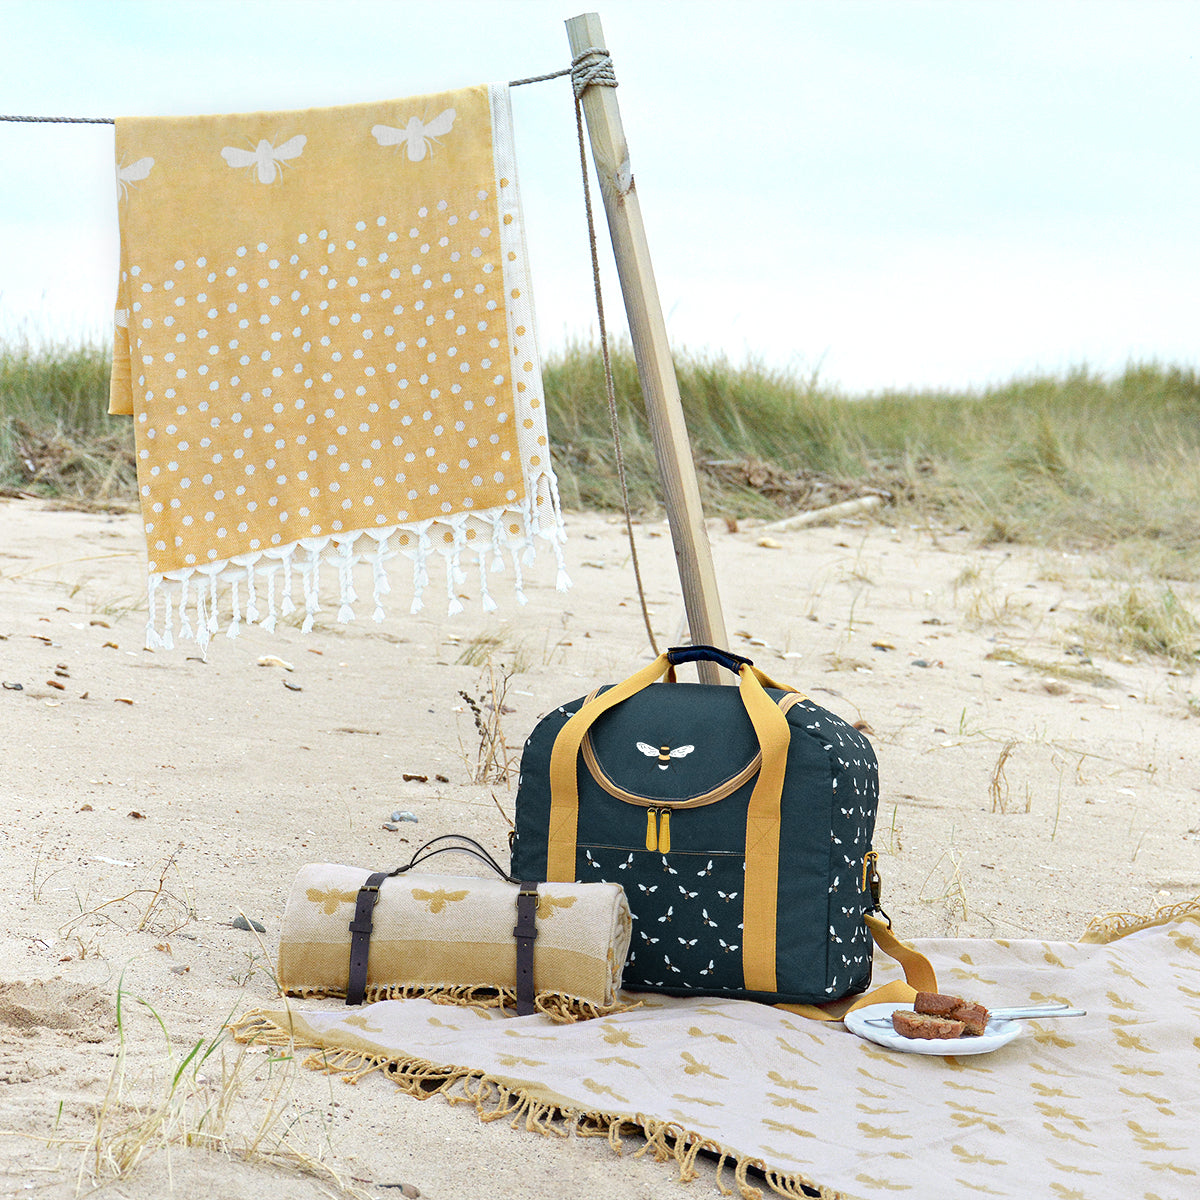 Our bees picnic bag, navy blue with yellow details and covered in Sophie Allport's popular bee design.